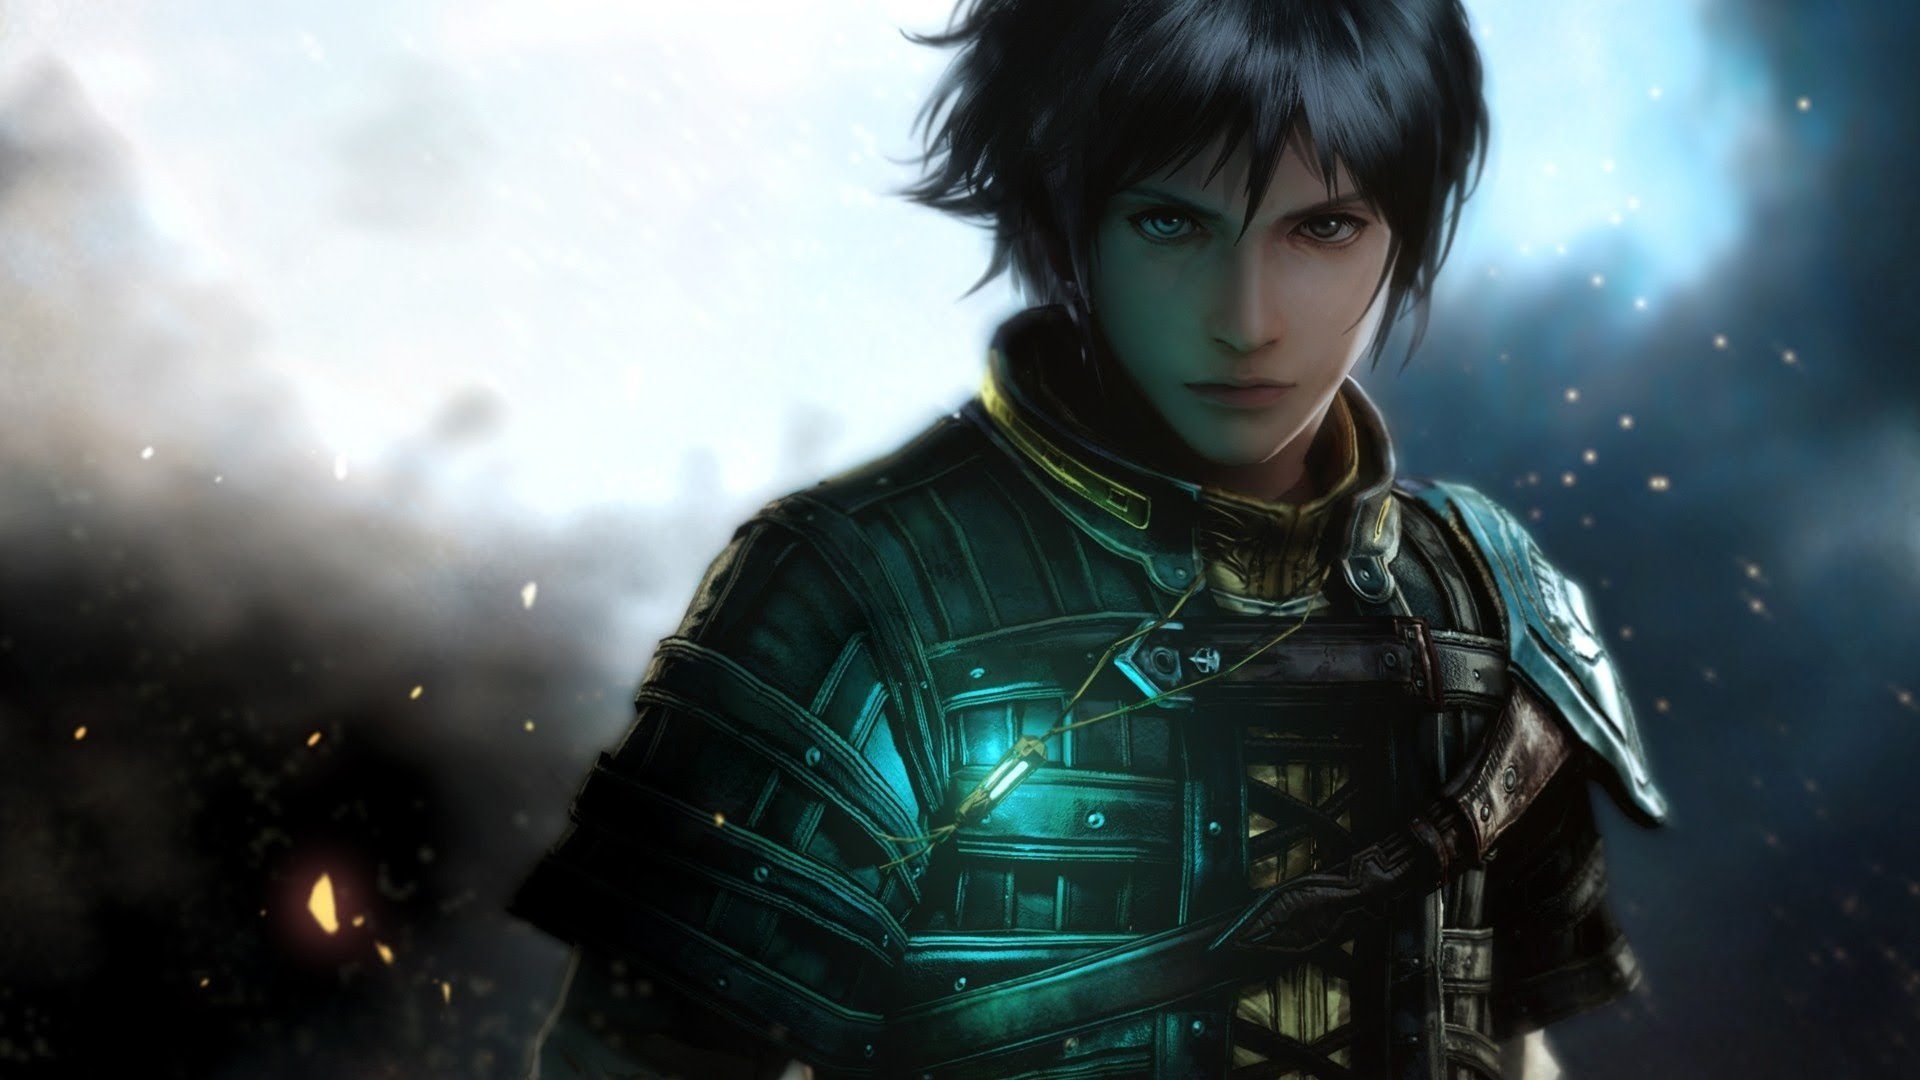 THE LAST REMNANT Remastered is finally coming to PS4